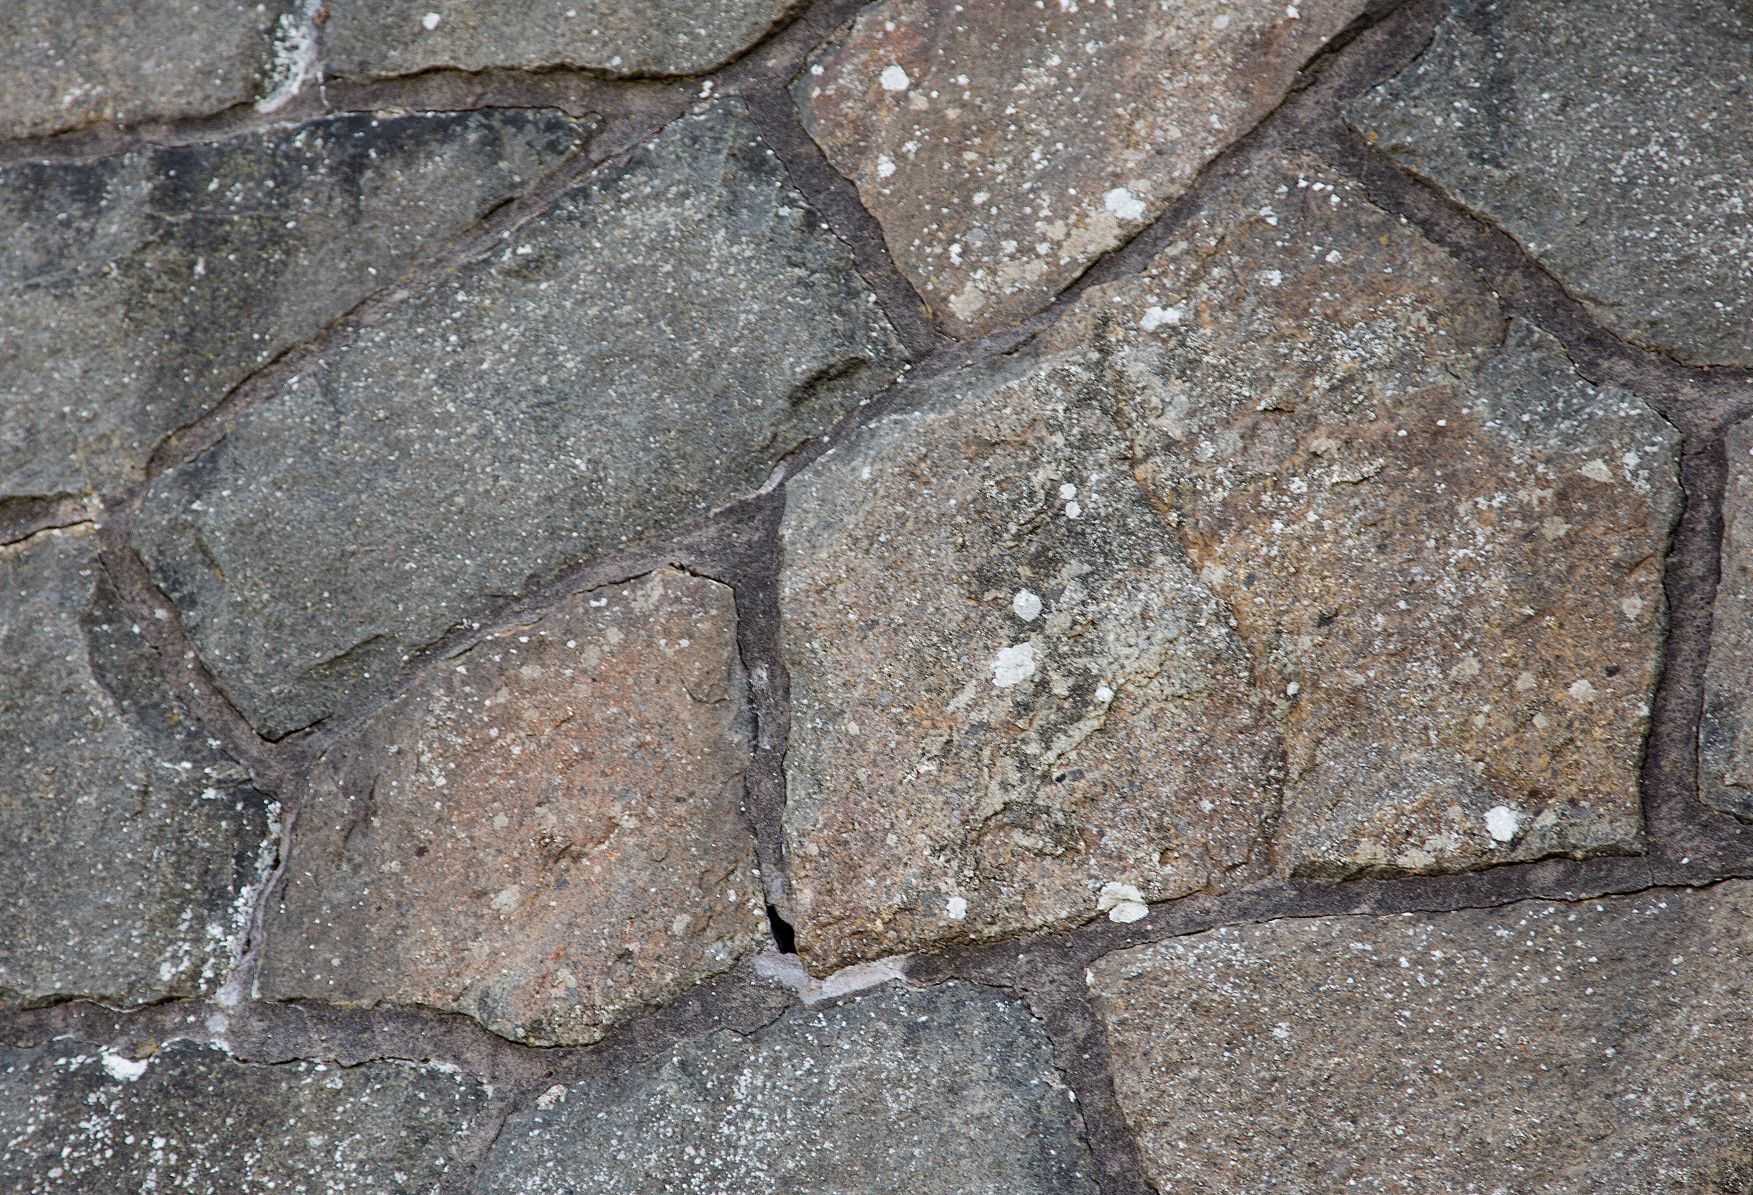 Restored wall from the 1910s and 1920s. The stones have a slightly straighter shape and there are no pebbles in the joints.